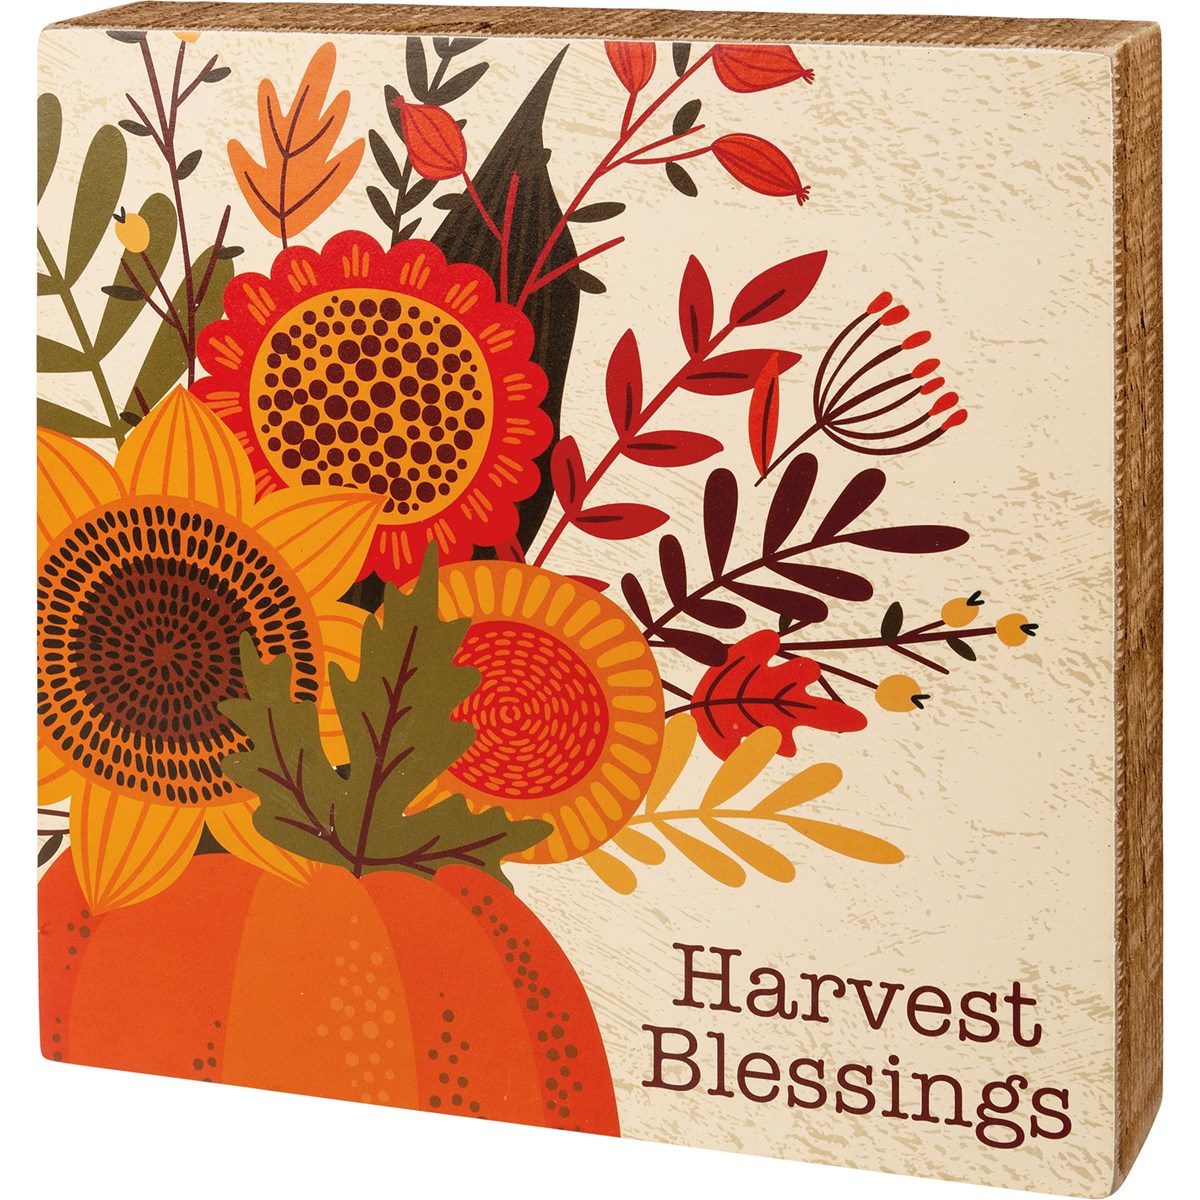 Box Sign - Harvest Blessings - 10" x 10" x 1.75" - Wood, Paper